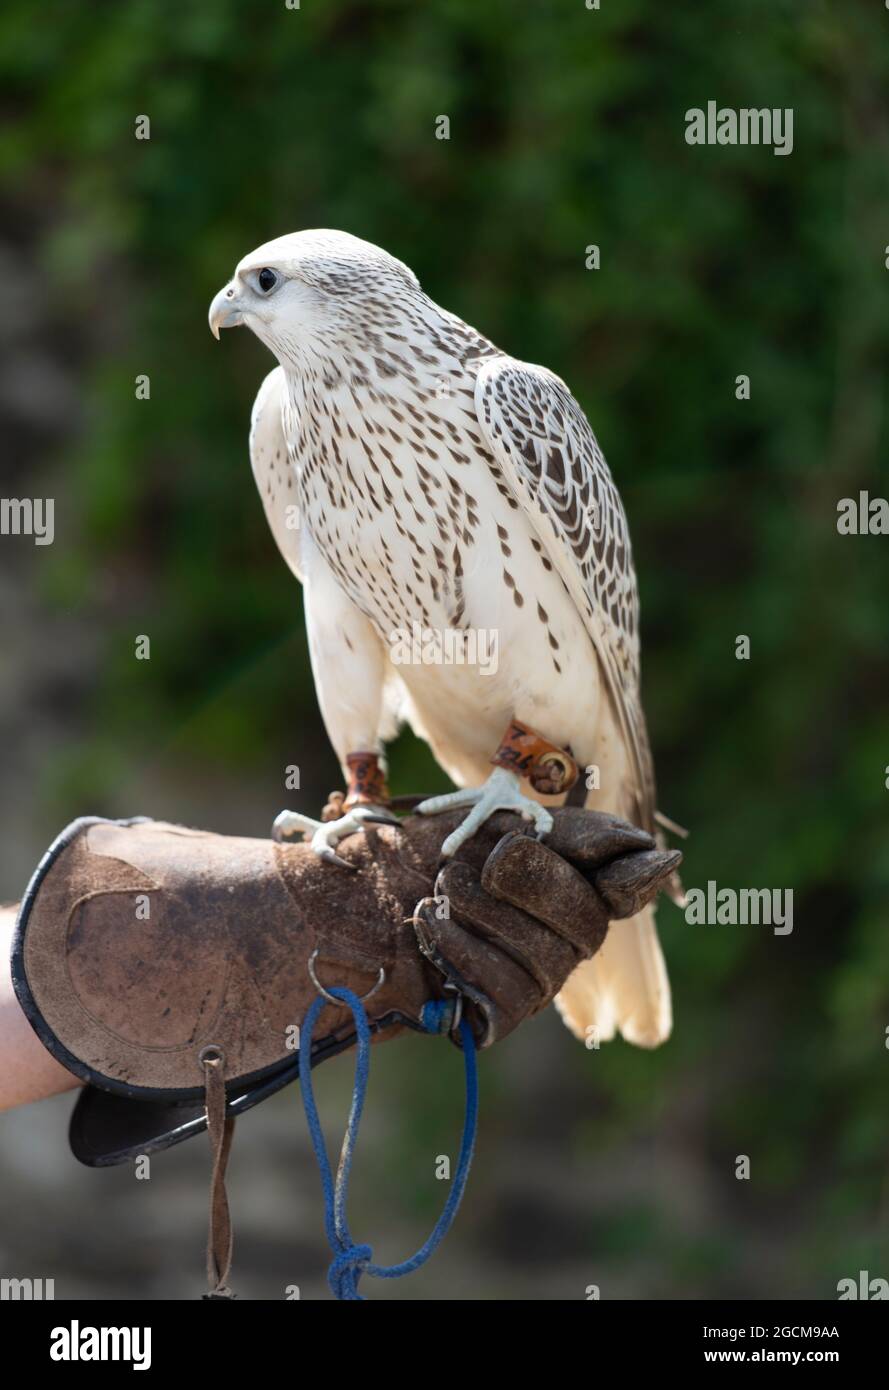 Gyrfalcon (Falco Rusticolus) on handler's gauntlet at the National Bird of Prey Centre, Russborough House, County Wicklow, Ireland Stock Photo